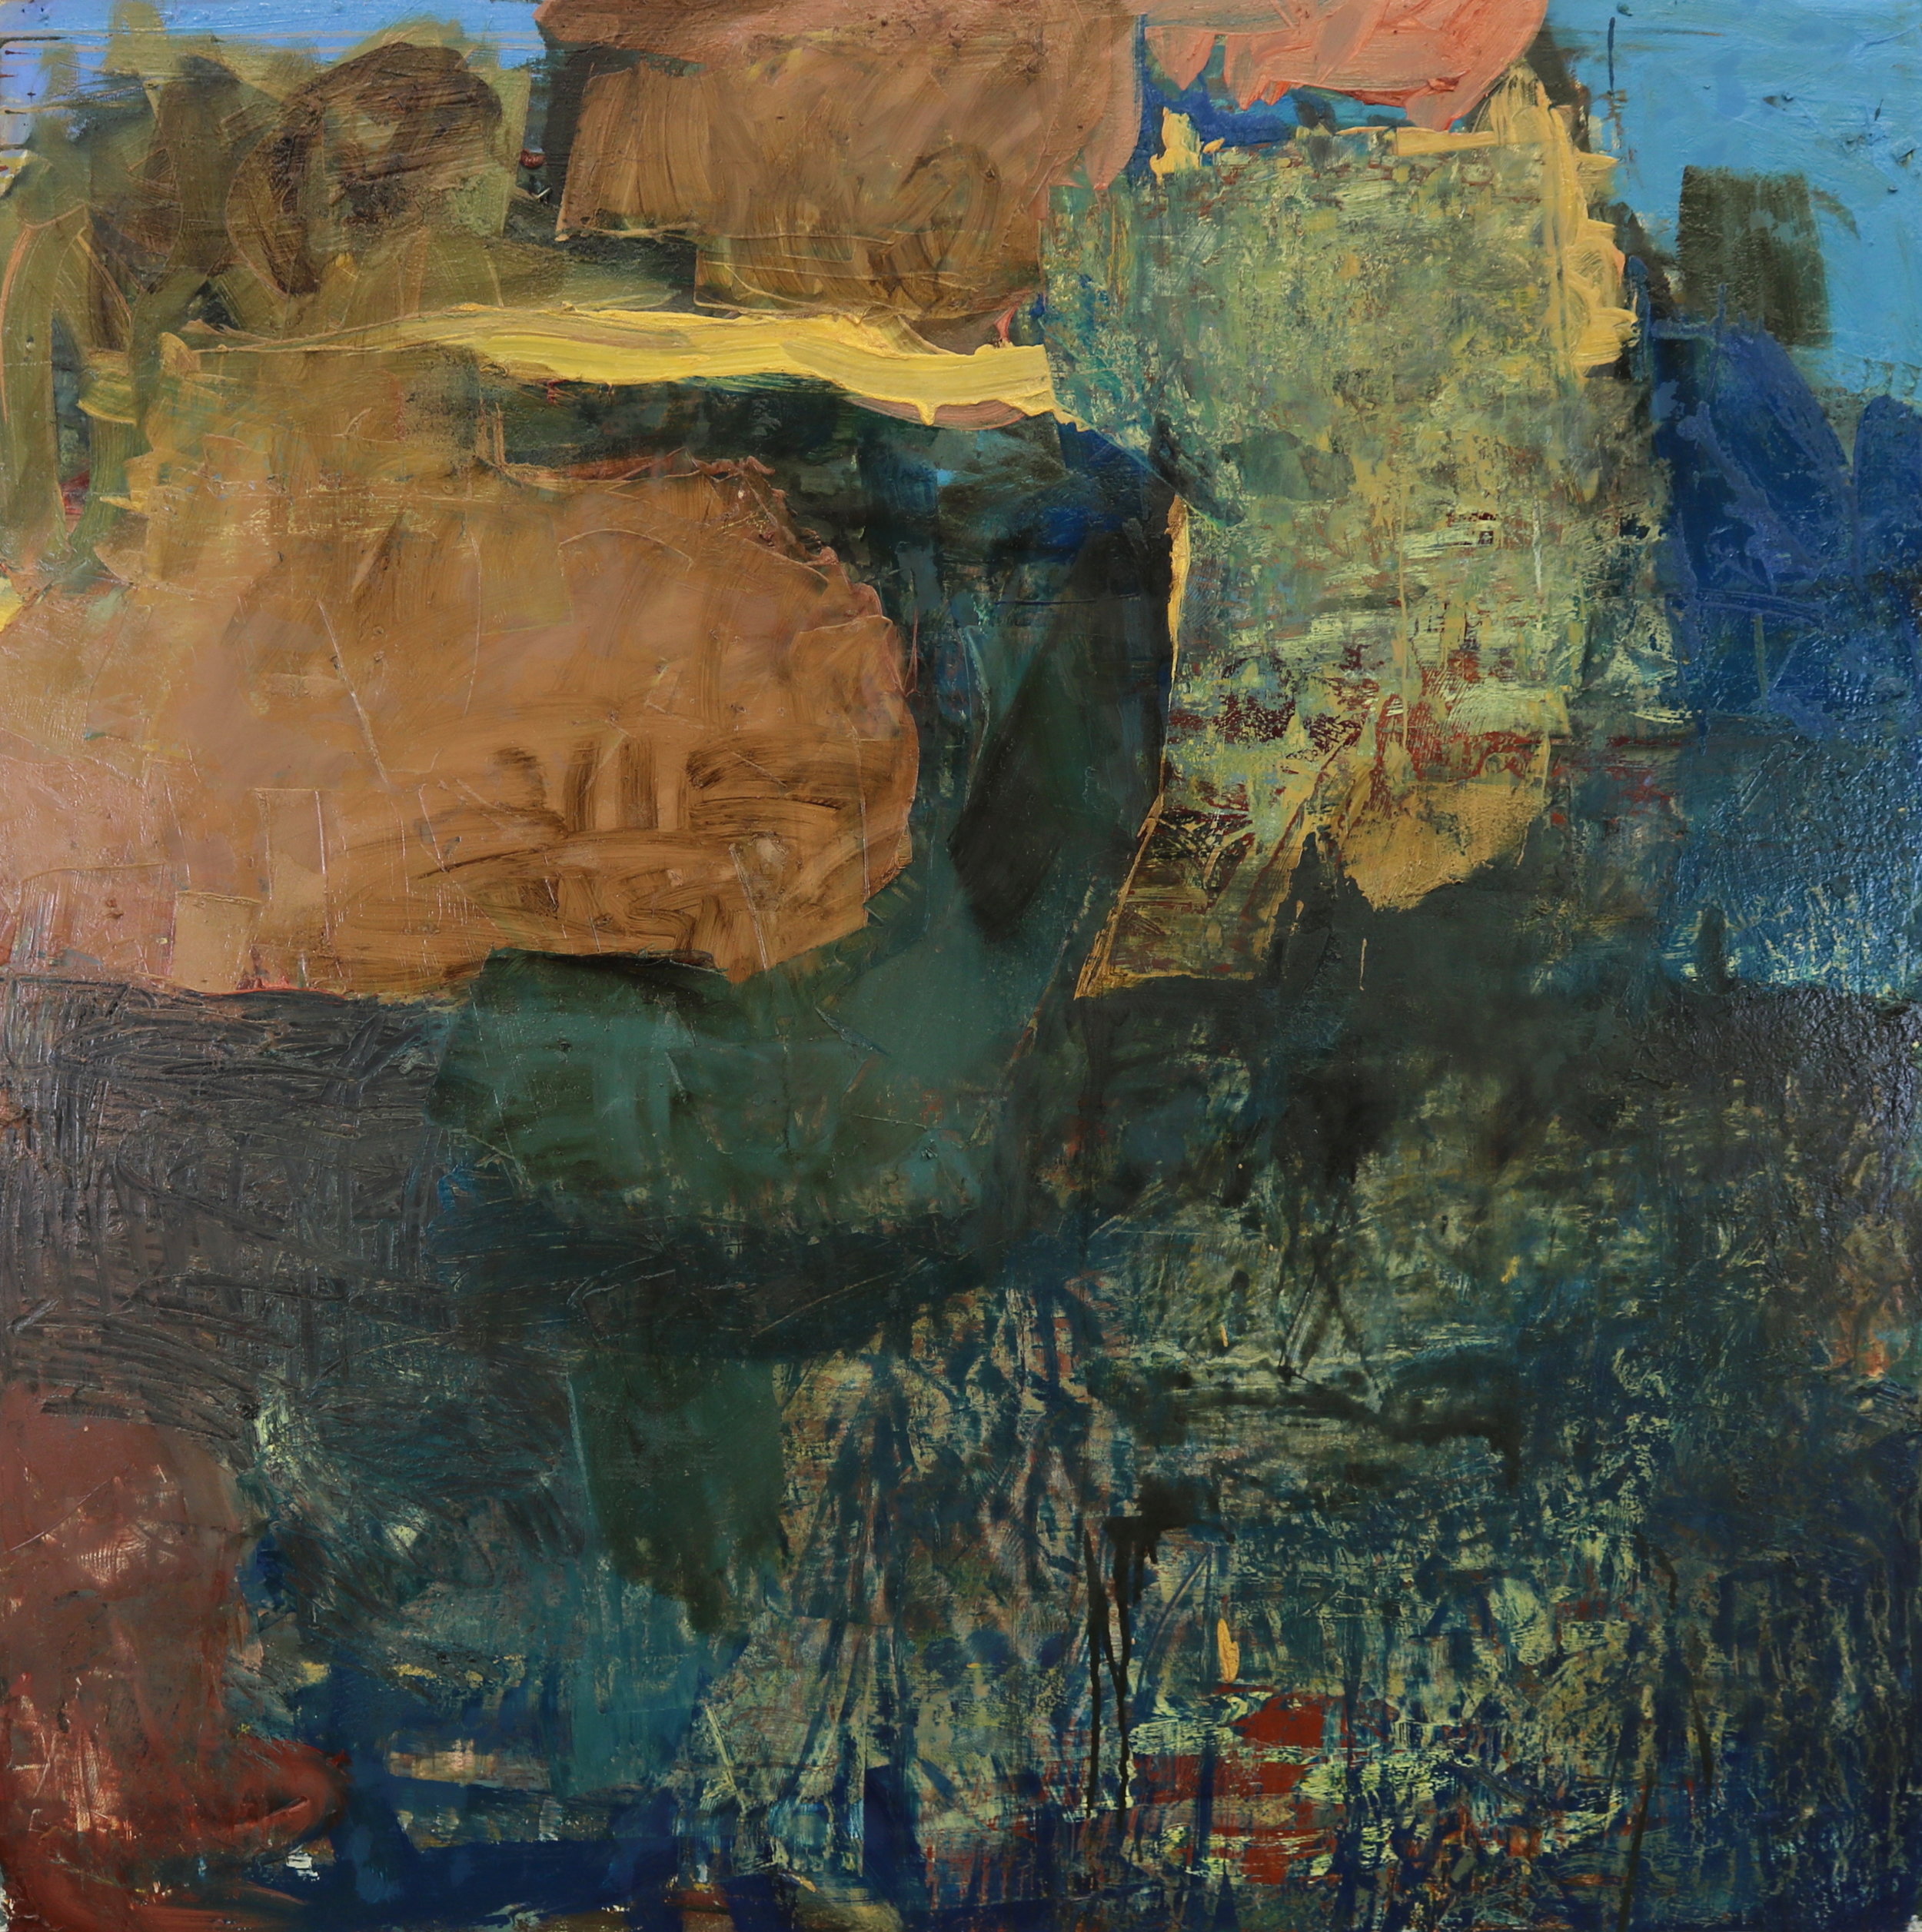  Leslie Zelamsky,  Point of Departure 2 , Mixed-media on wood panel, 42x42 